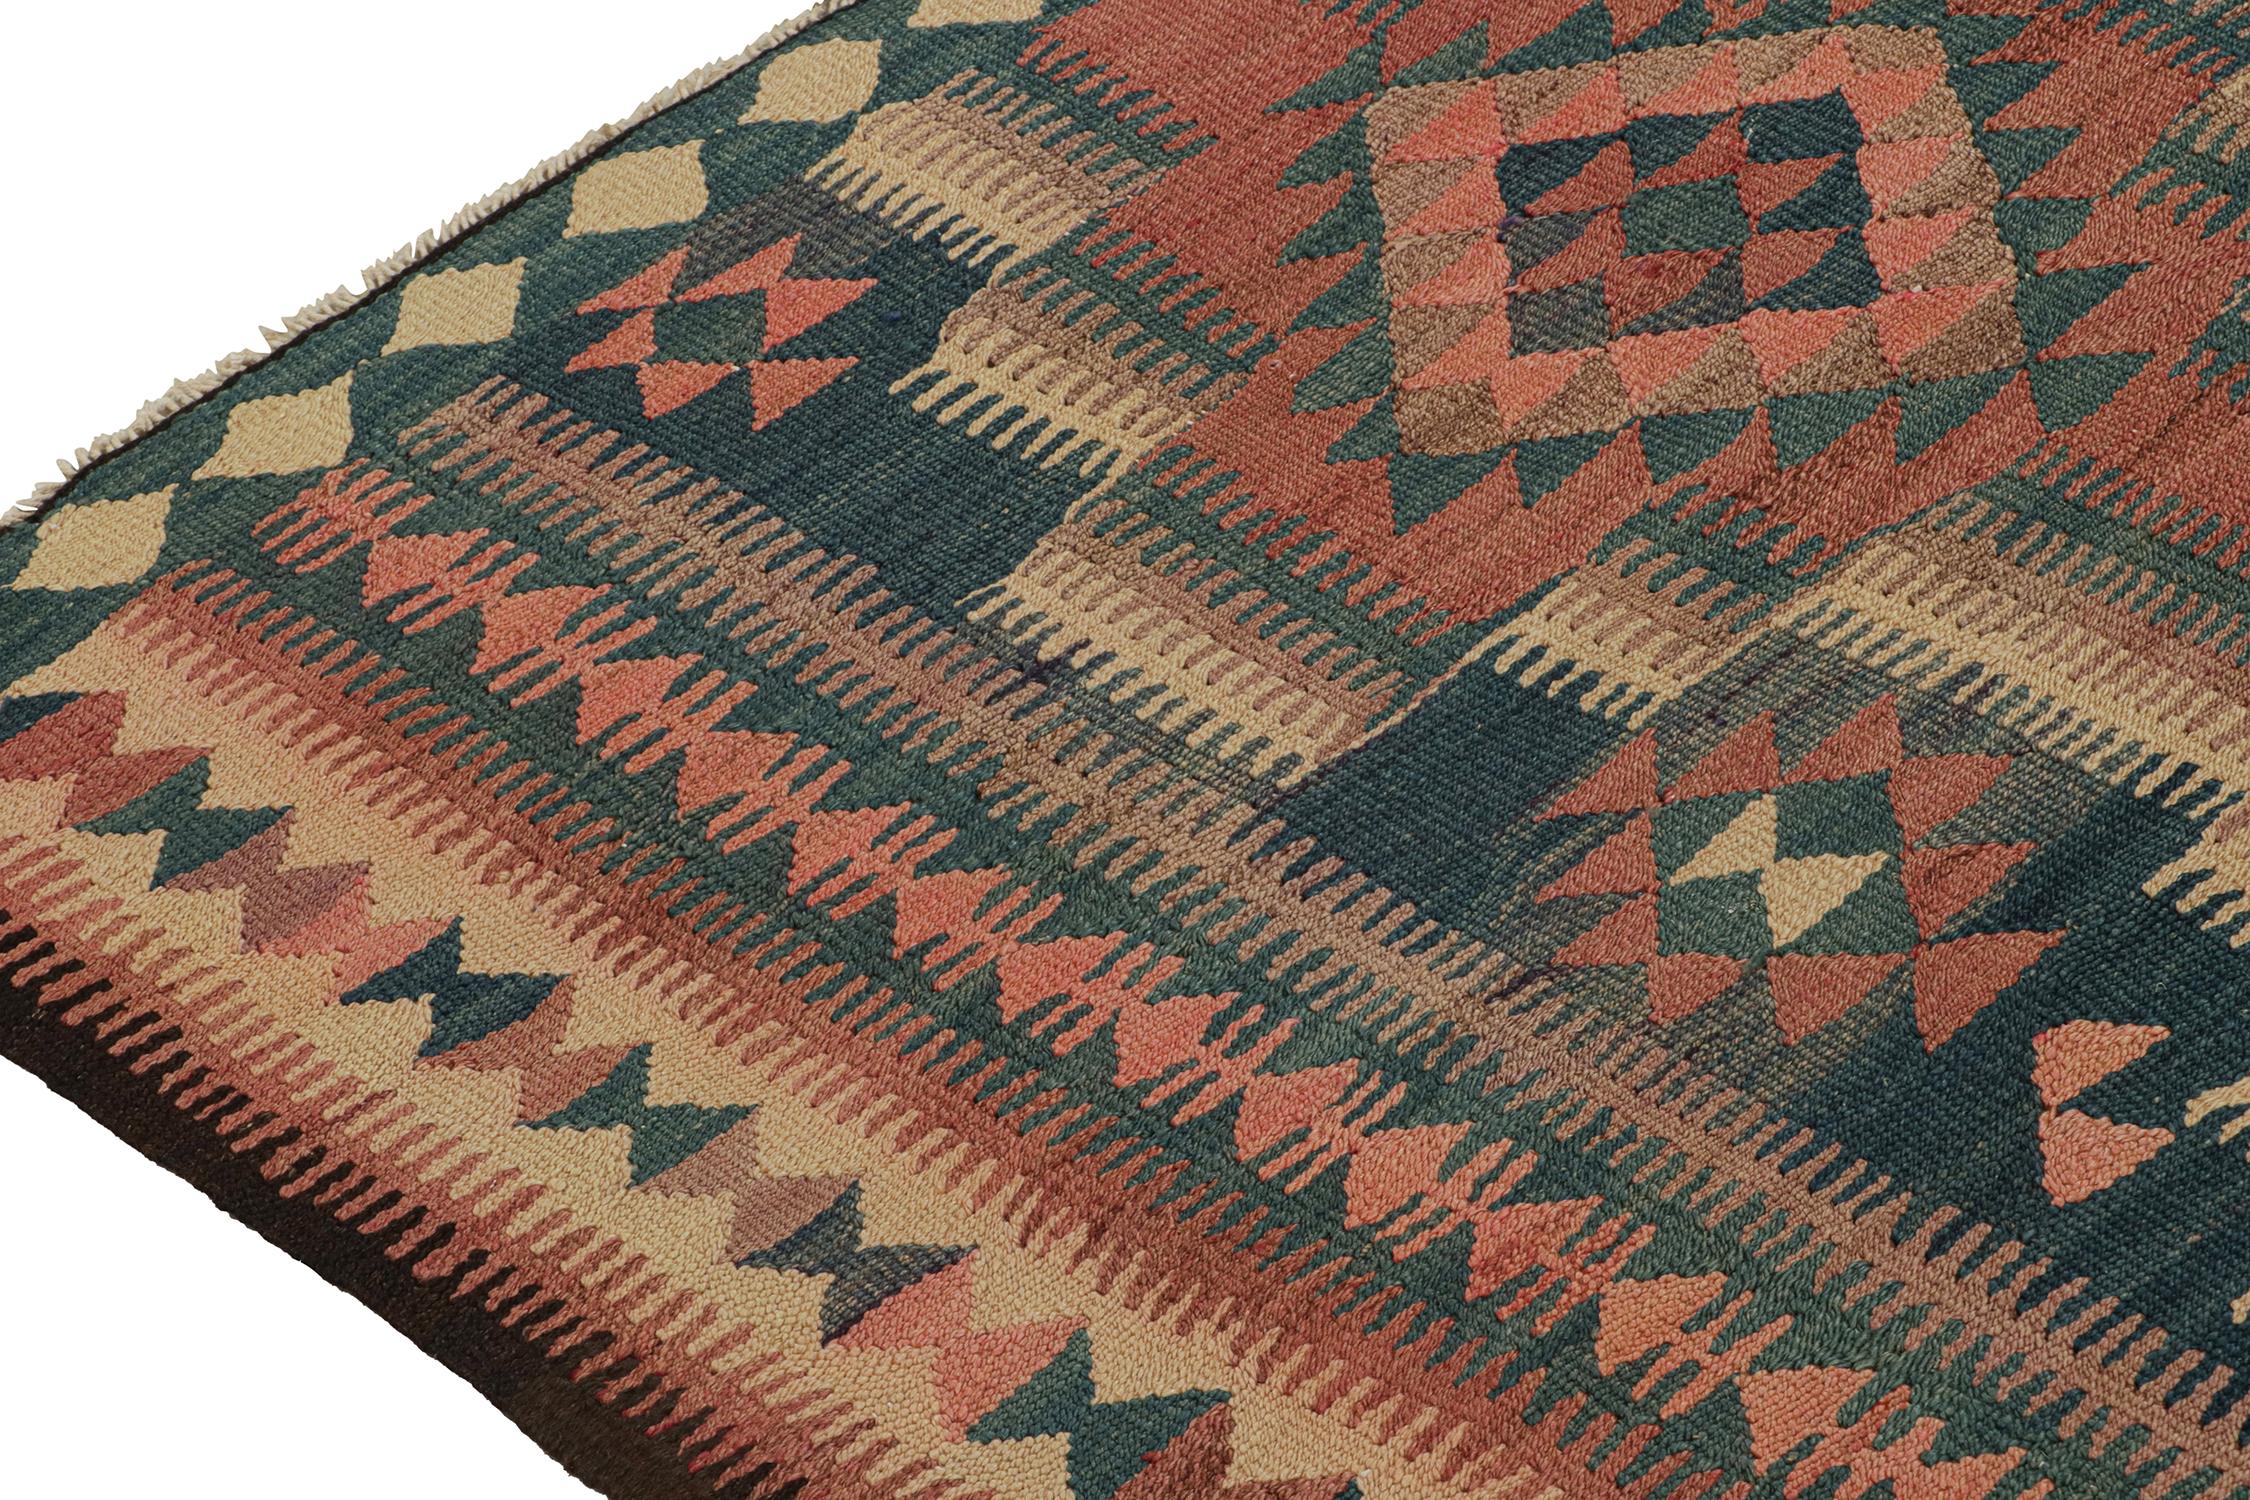 Tribal Vintage Kurdish Persian Kilim in Blue and Red Geometric Patterns by Rug & Kilim For Sale